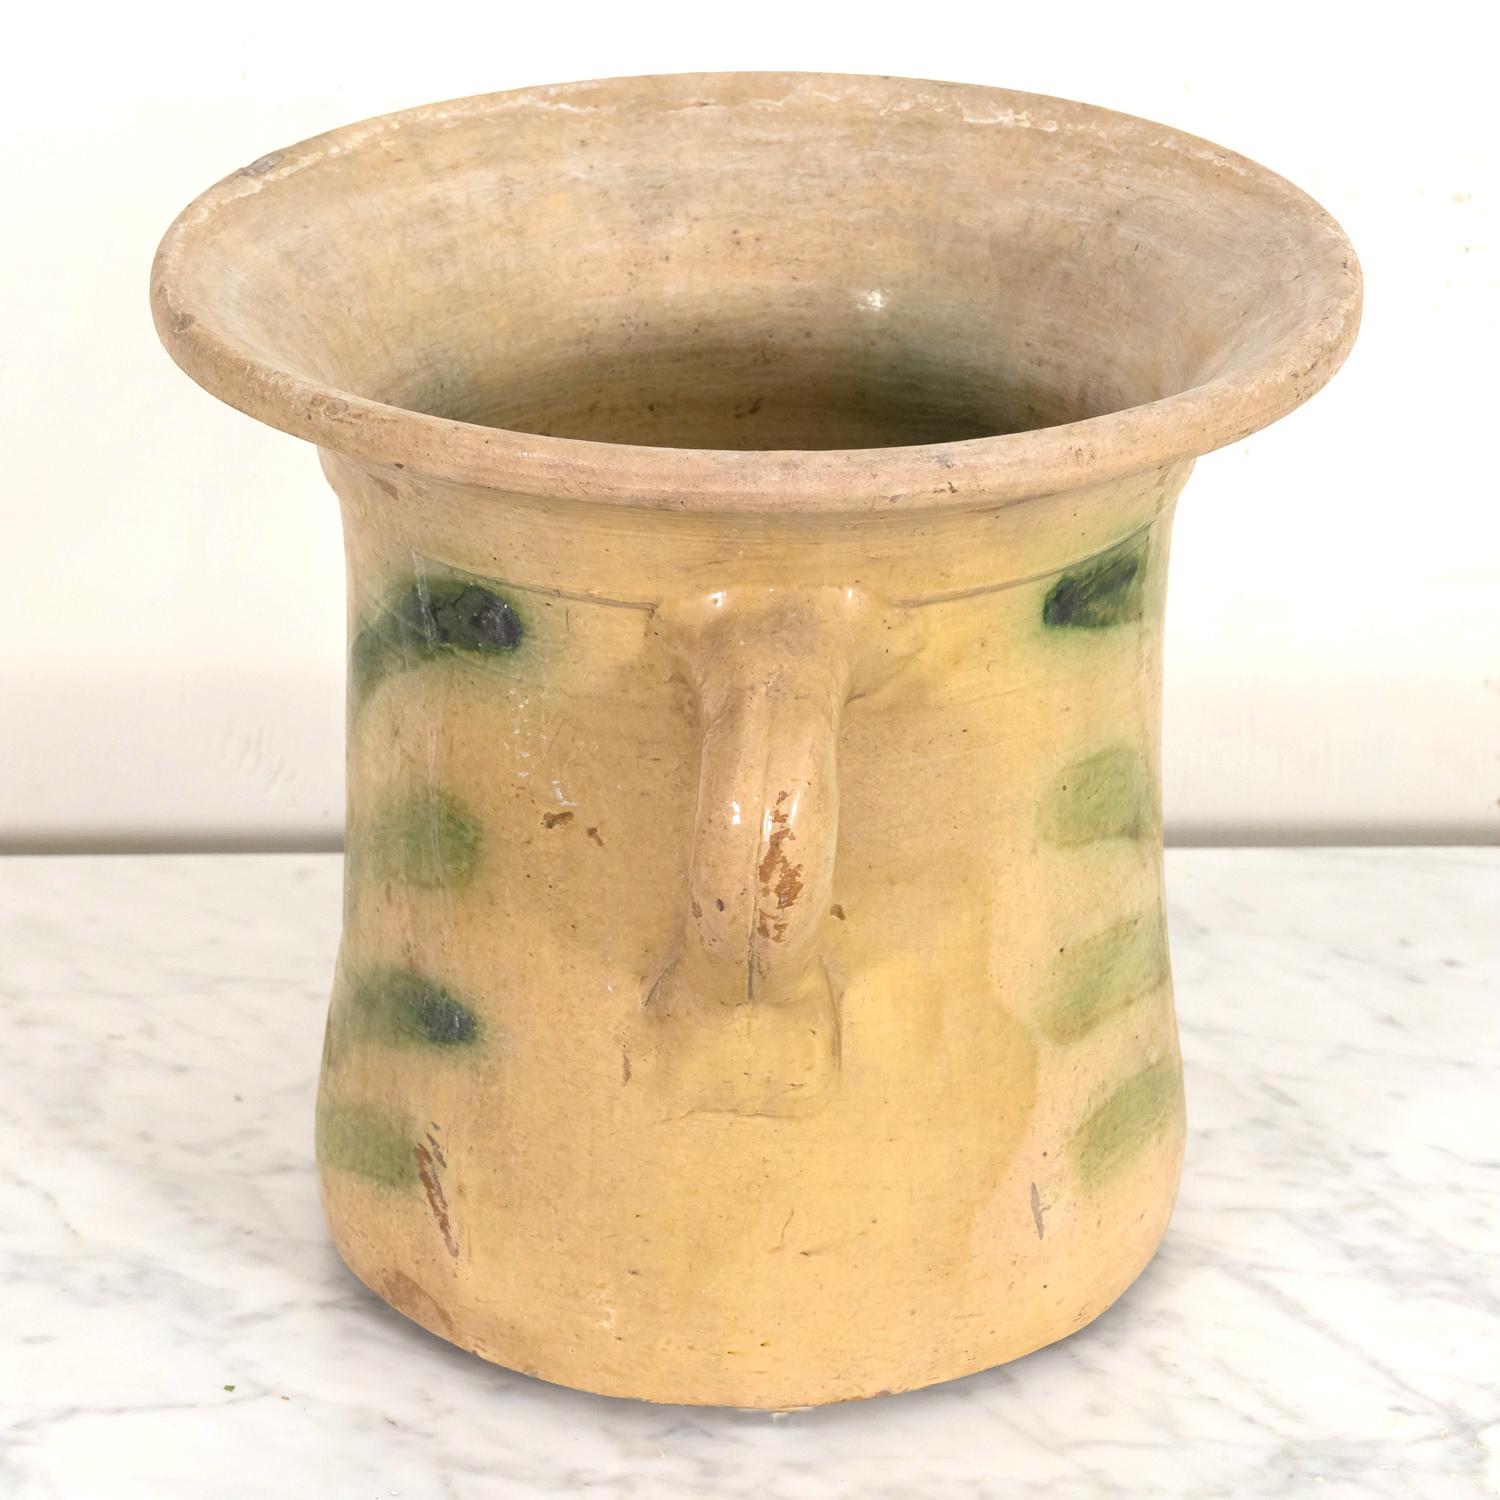 19th Century French Pot d'Aisance en Terre Vernisse or Glazed Clay Chamber Pot In Good Condition For Sale In Birmingham, AL